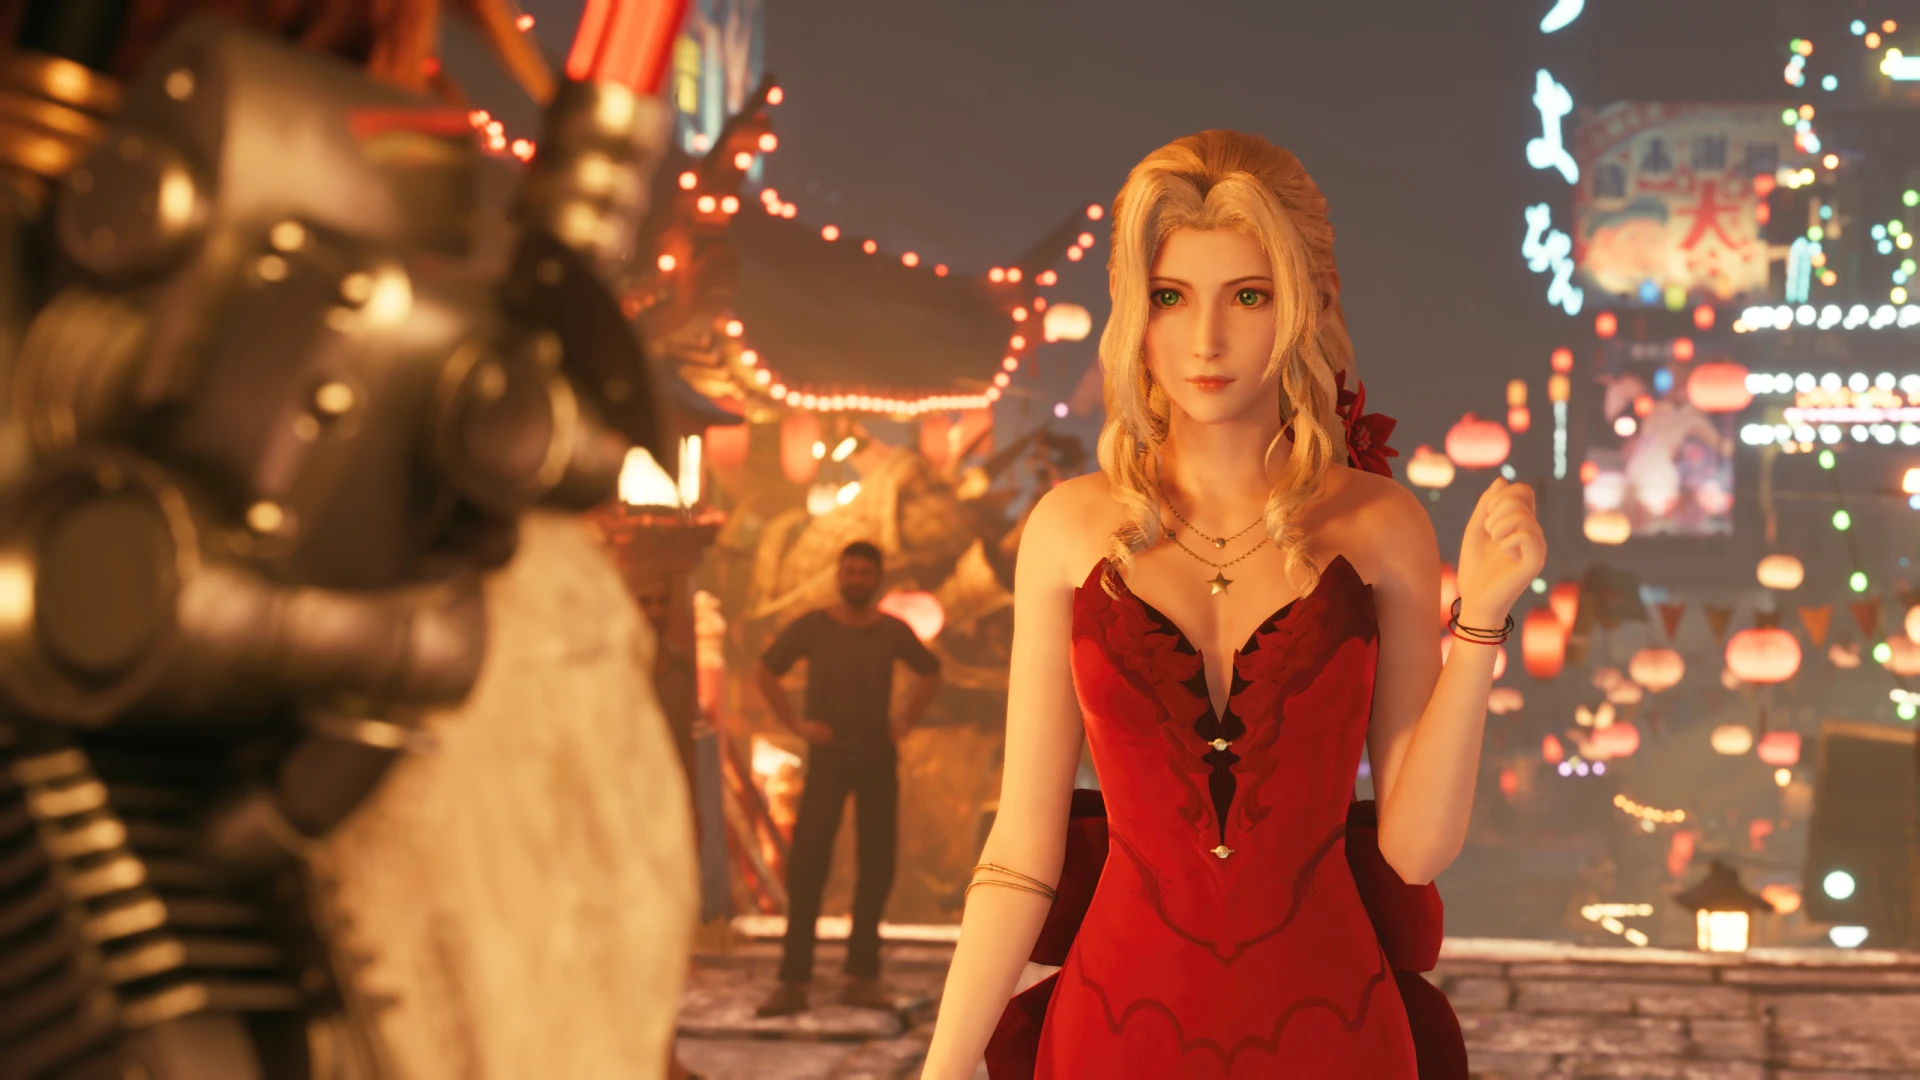 Hair Colors for Cloud Aerith and Tifa at Final Fantasy VII Remake Nexus -  Mods and community